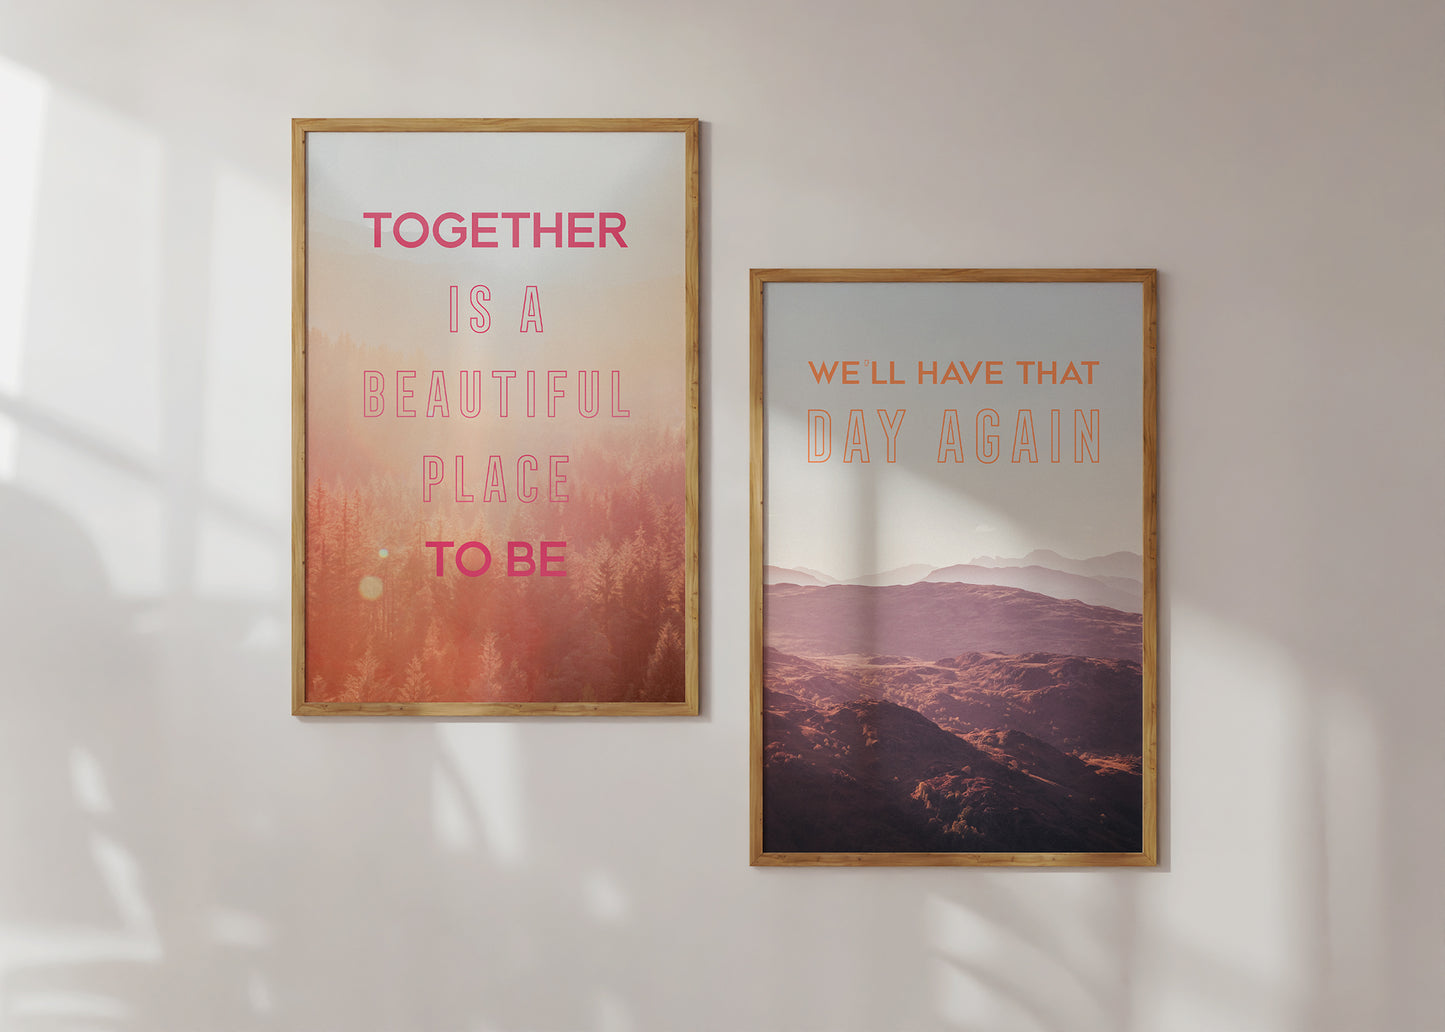 Together is a Beautiful Place to be Print